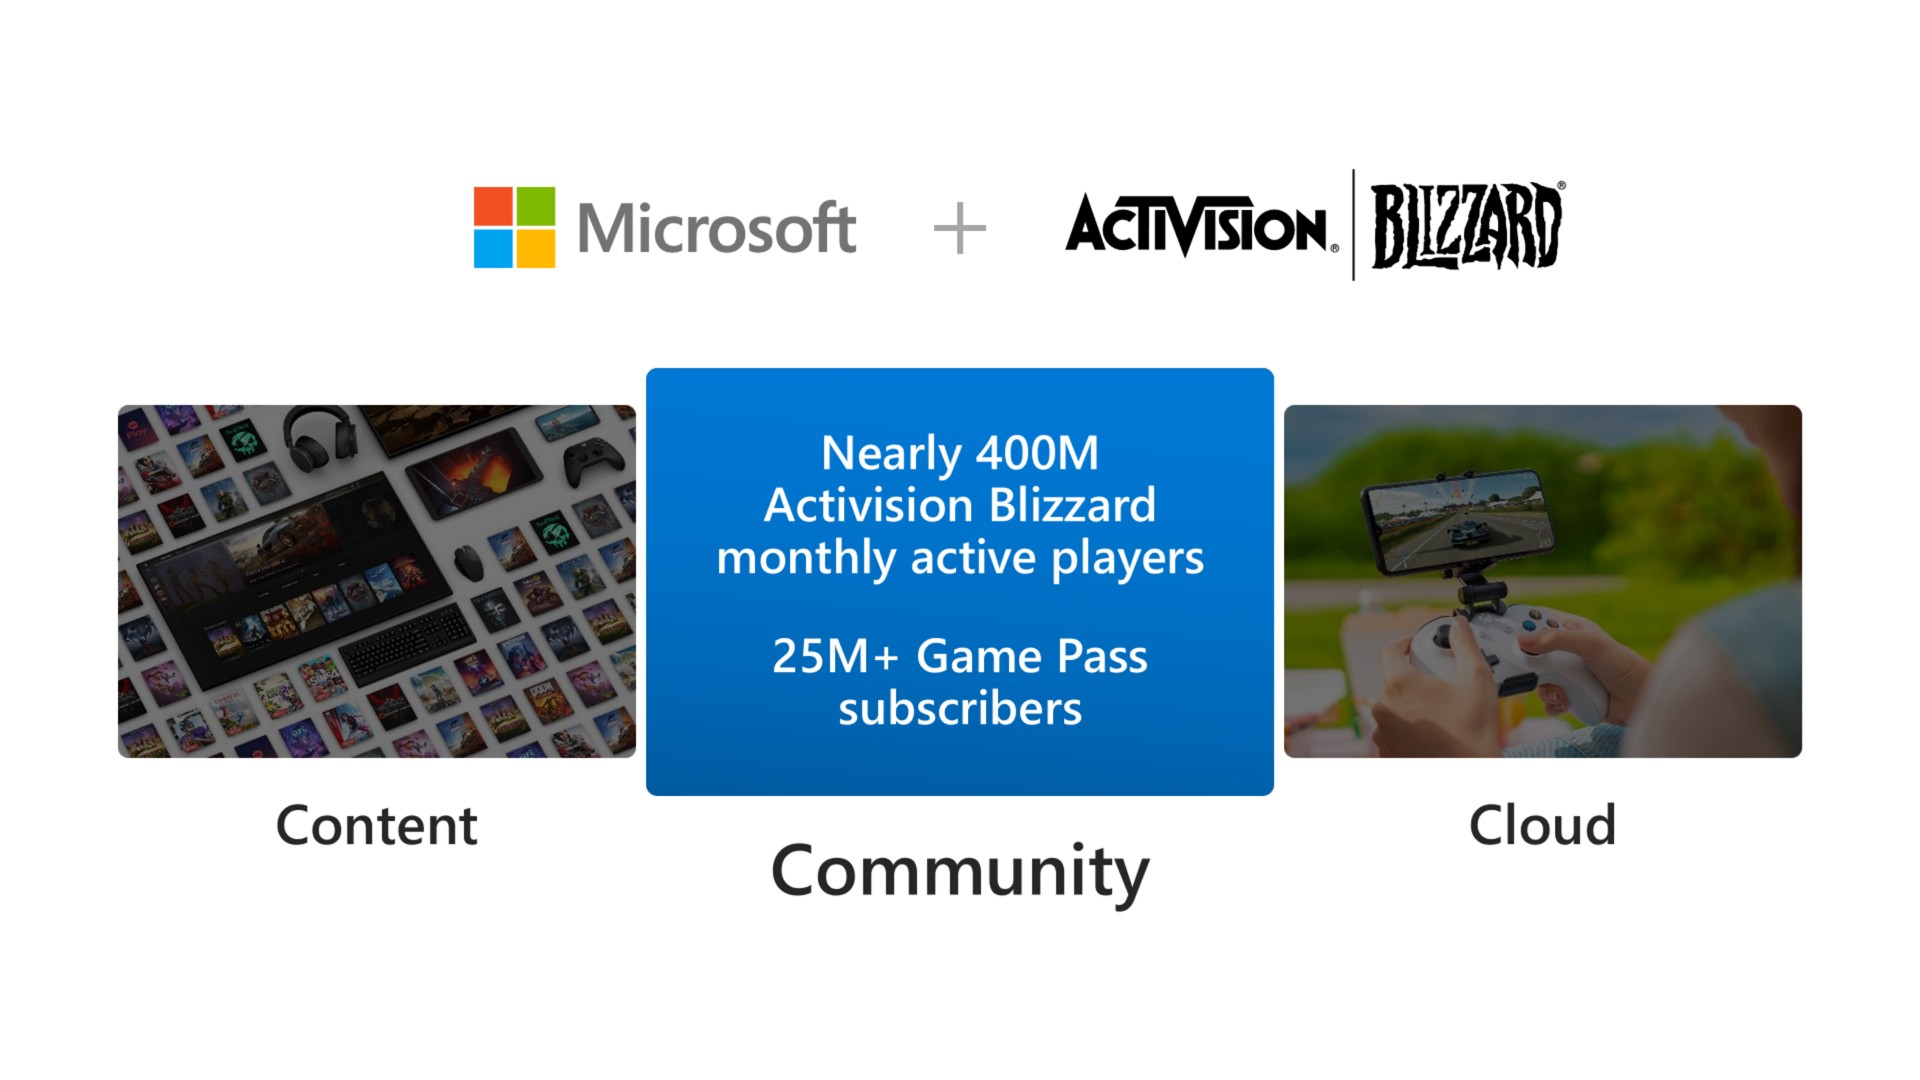 nearly am lee monthly active players game pass subscribers community cloud content | Microsoft